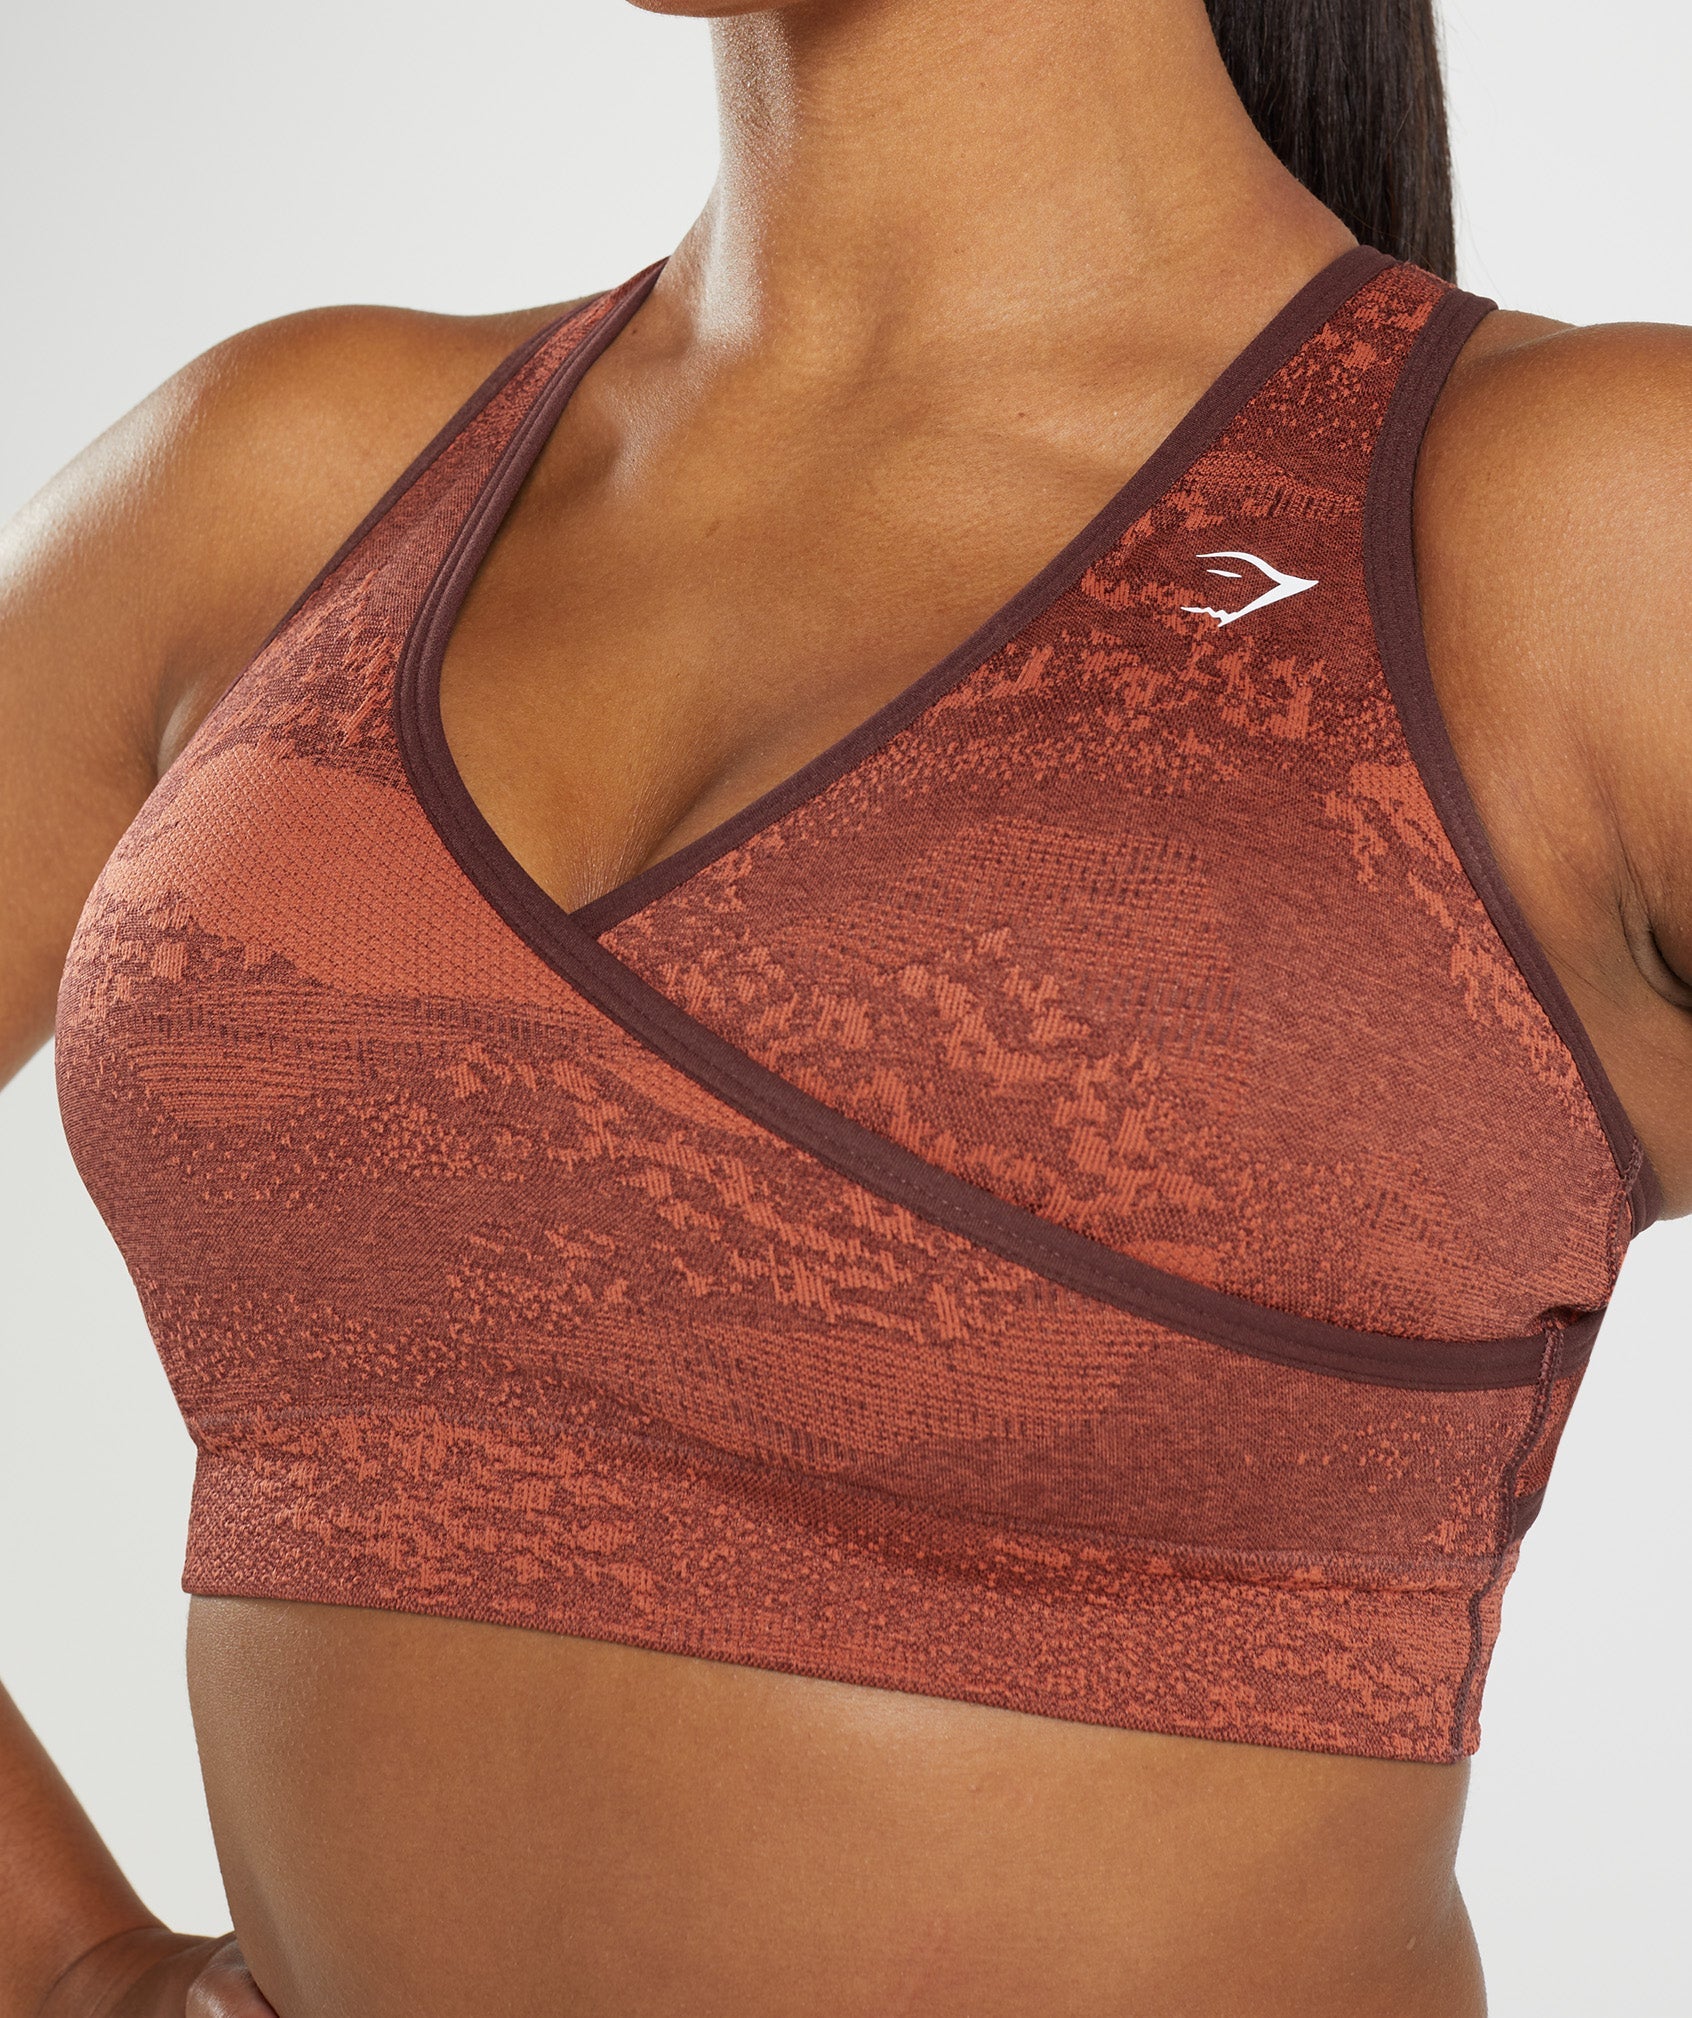 Adapt Camo Seamless Sports Bra in Storm Red/Cherry Brown